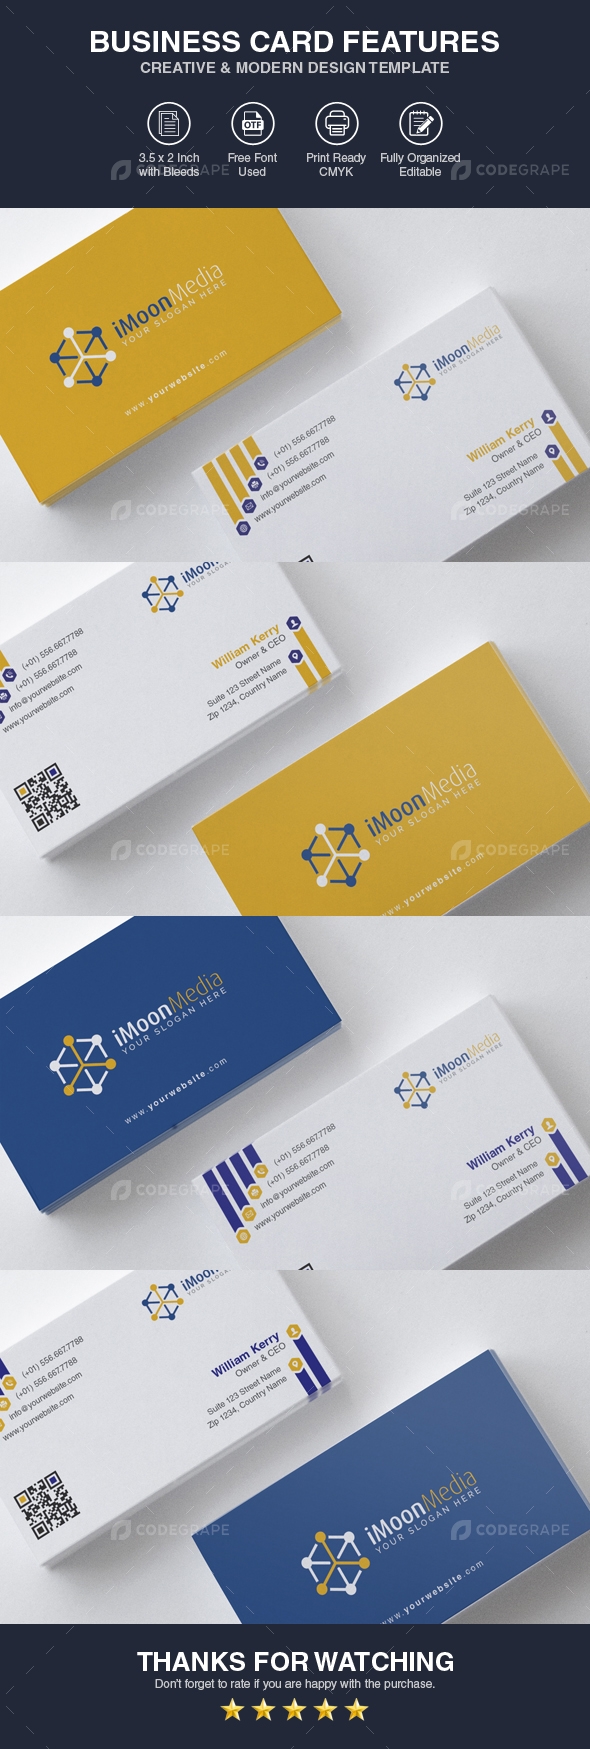 Professional Business Card Template Vol 02